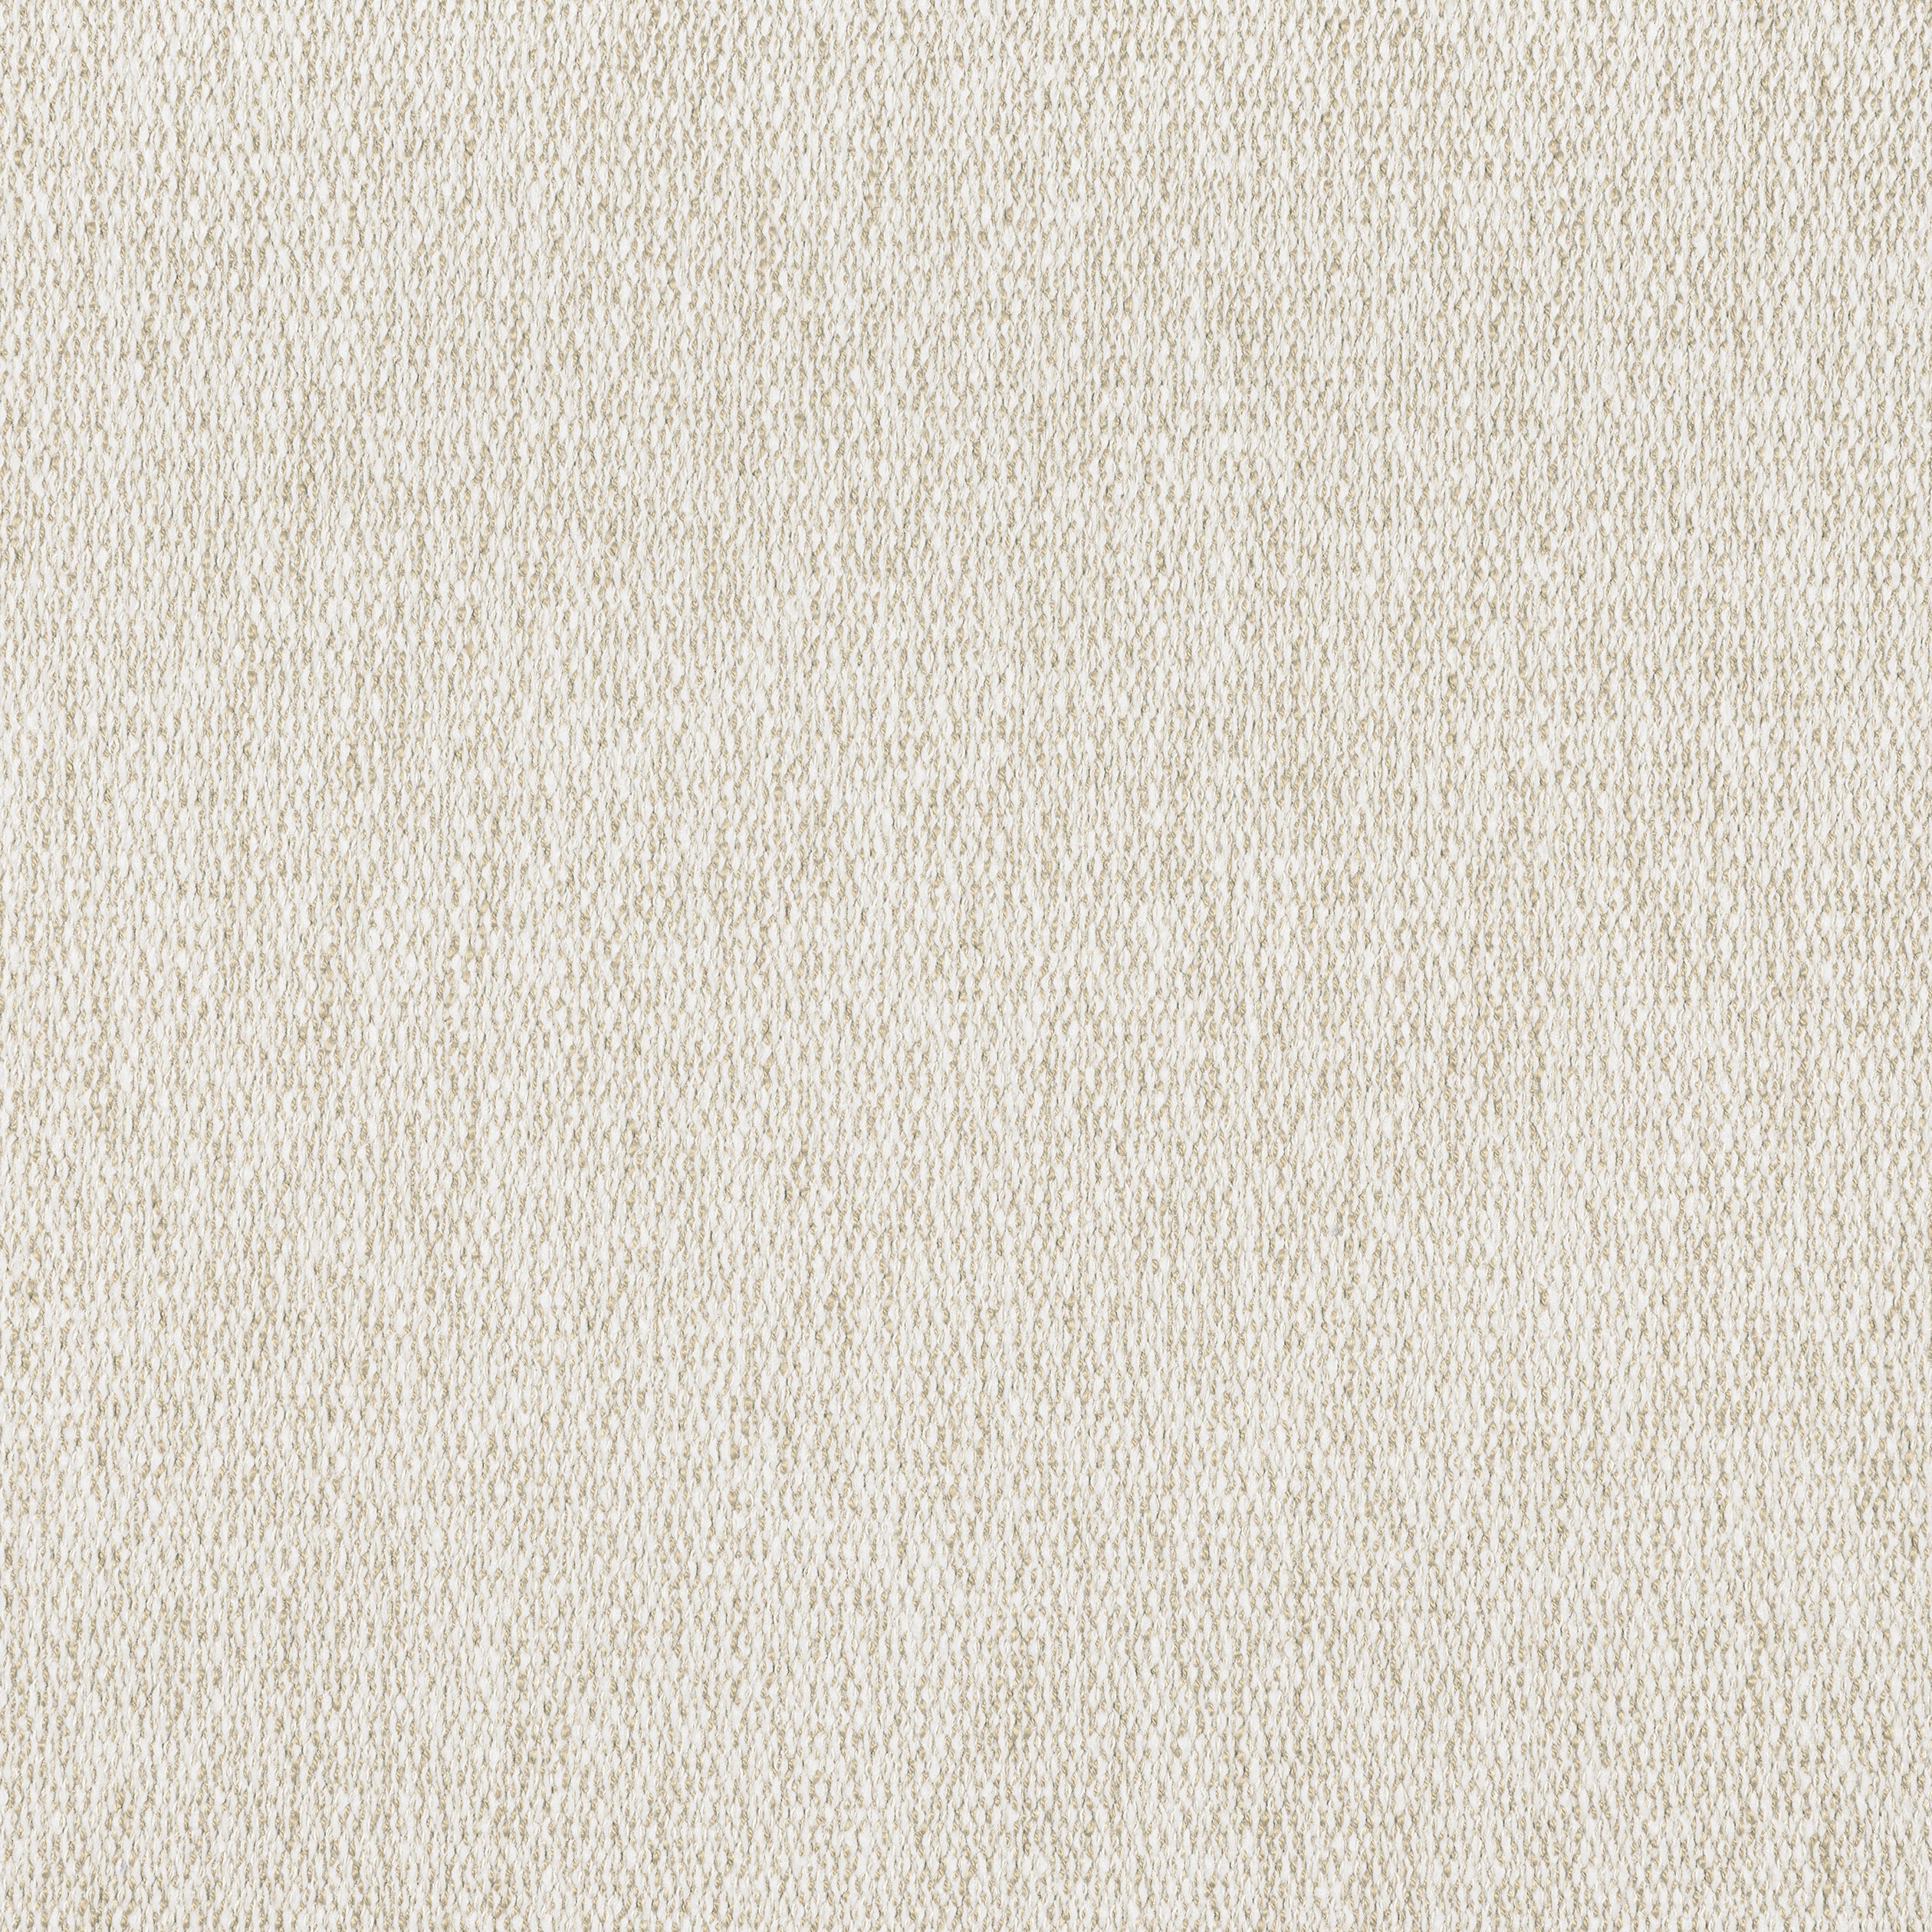 Arroyo fabric in almond color - pattern number W8780 - by Thibaut in the Haven Textures collection